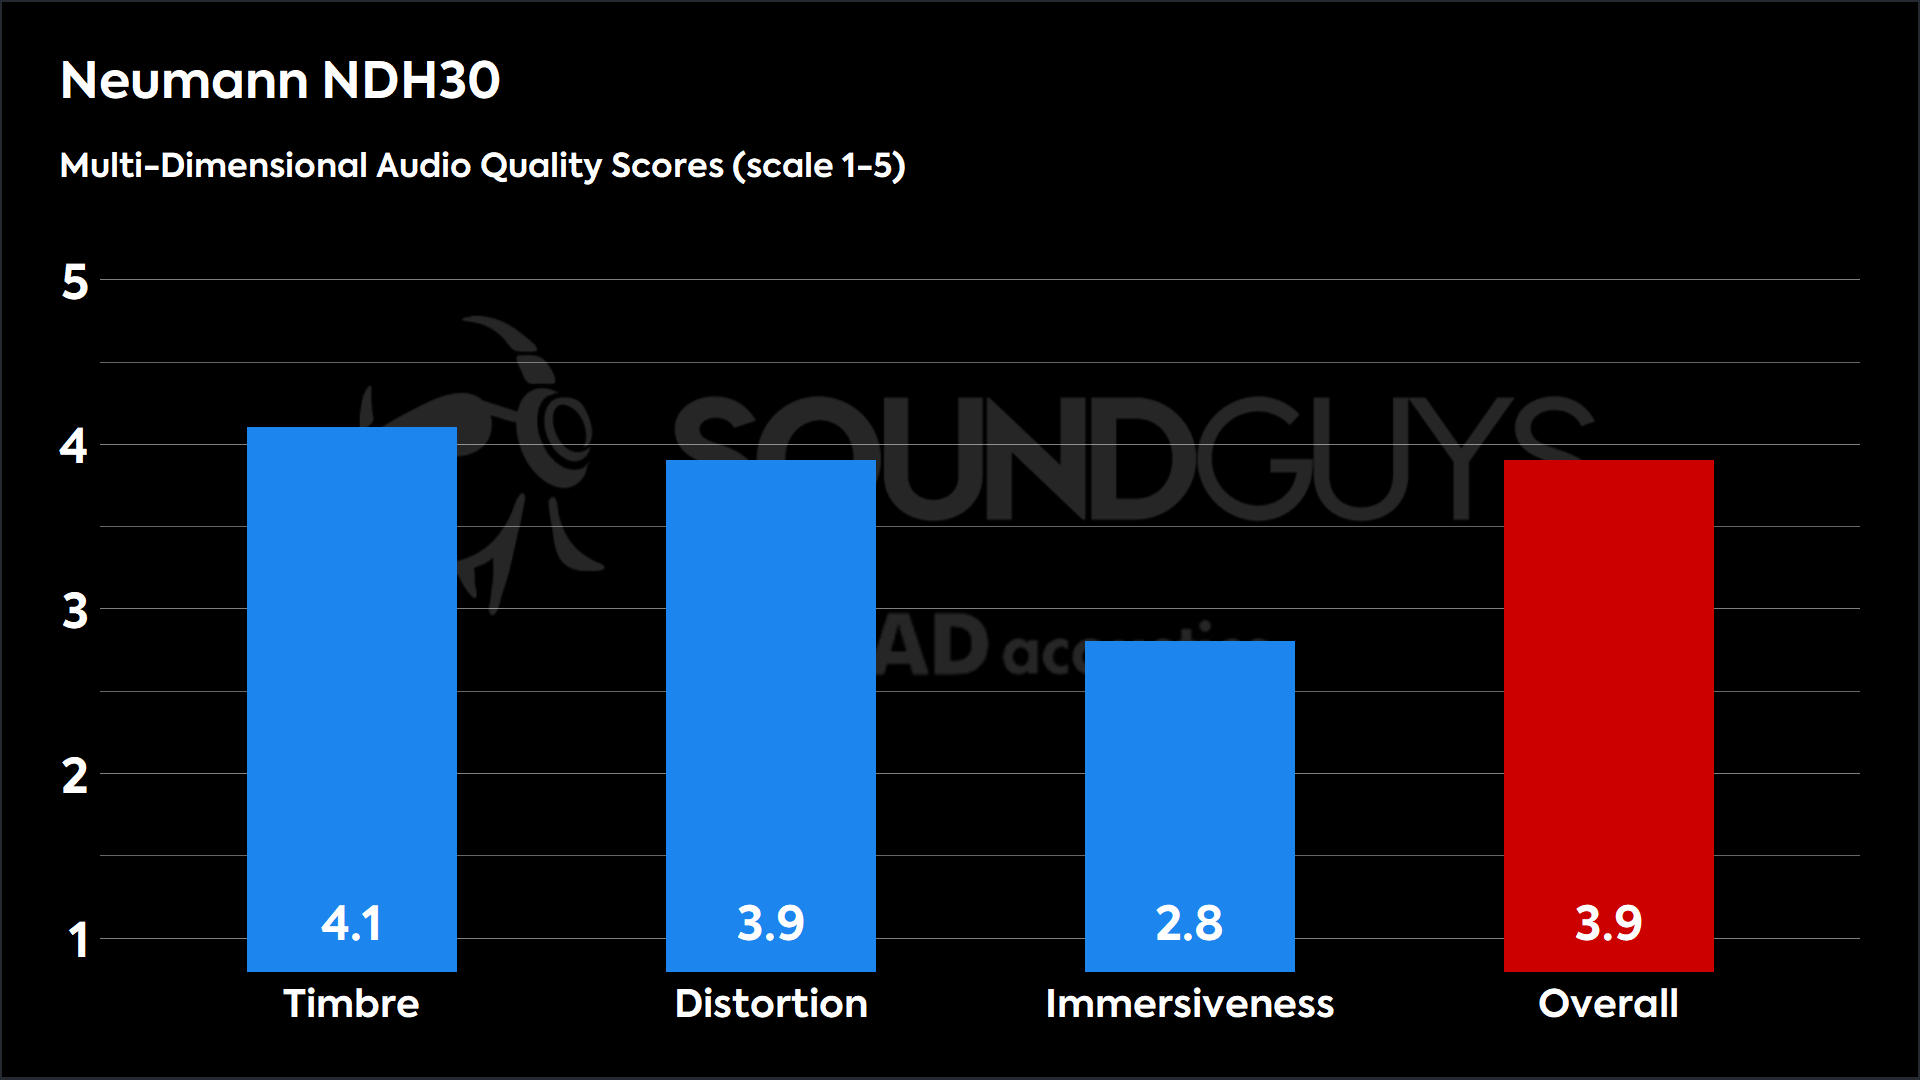 This chart shows the MDAQS results for the Neumann NDH30 in Default mode. The Timbre score is 4.1, The Distortion score is 3.9, the Immersiveness score is 2.8, and the Overall Score is 3.9).